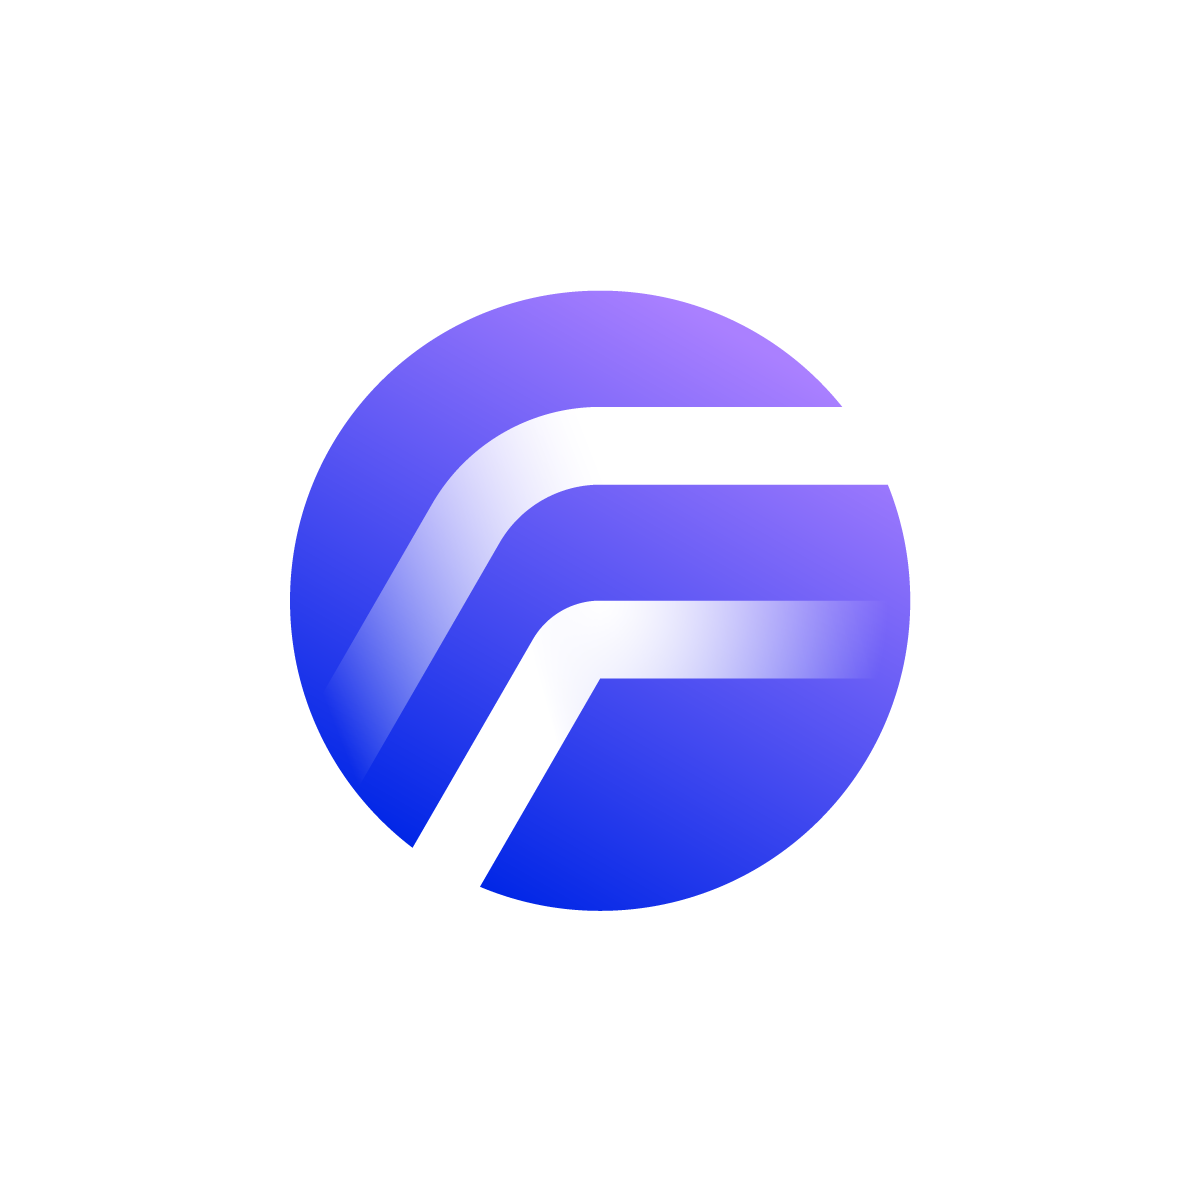 Dynamic Flow F Logo: A geometric representation of the letter F inside a circle, with gradients and transparent elements conveying motion and elegance